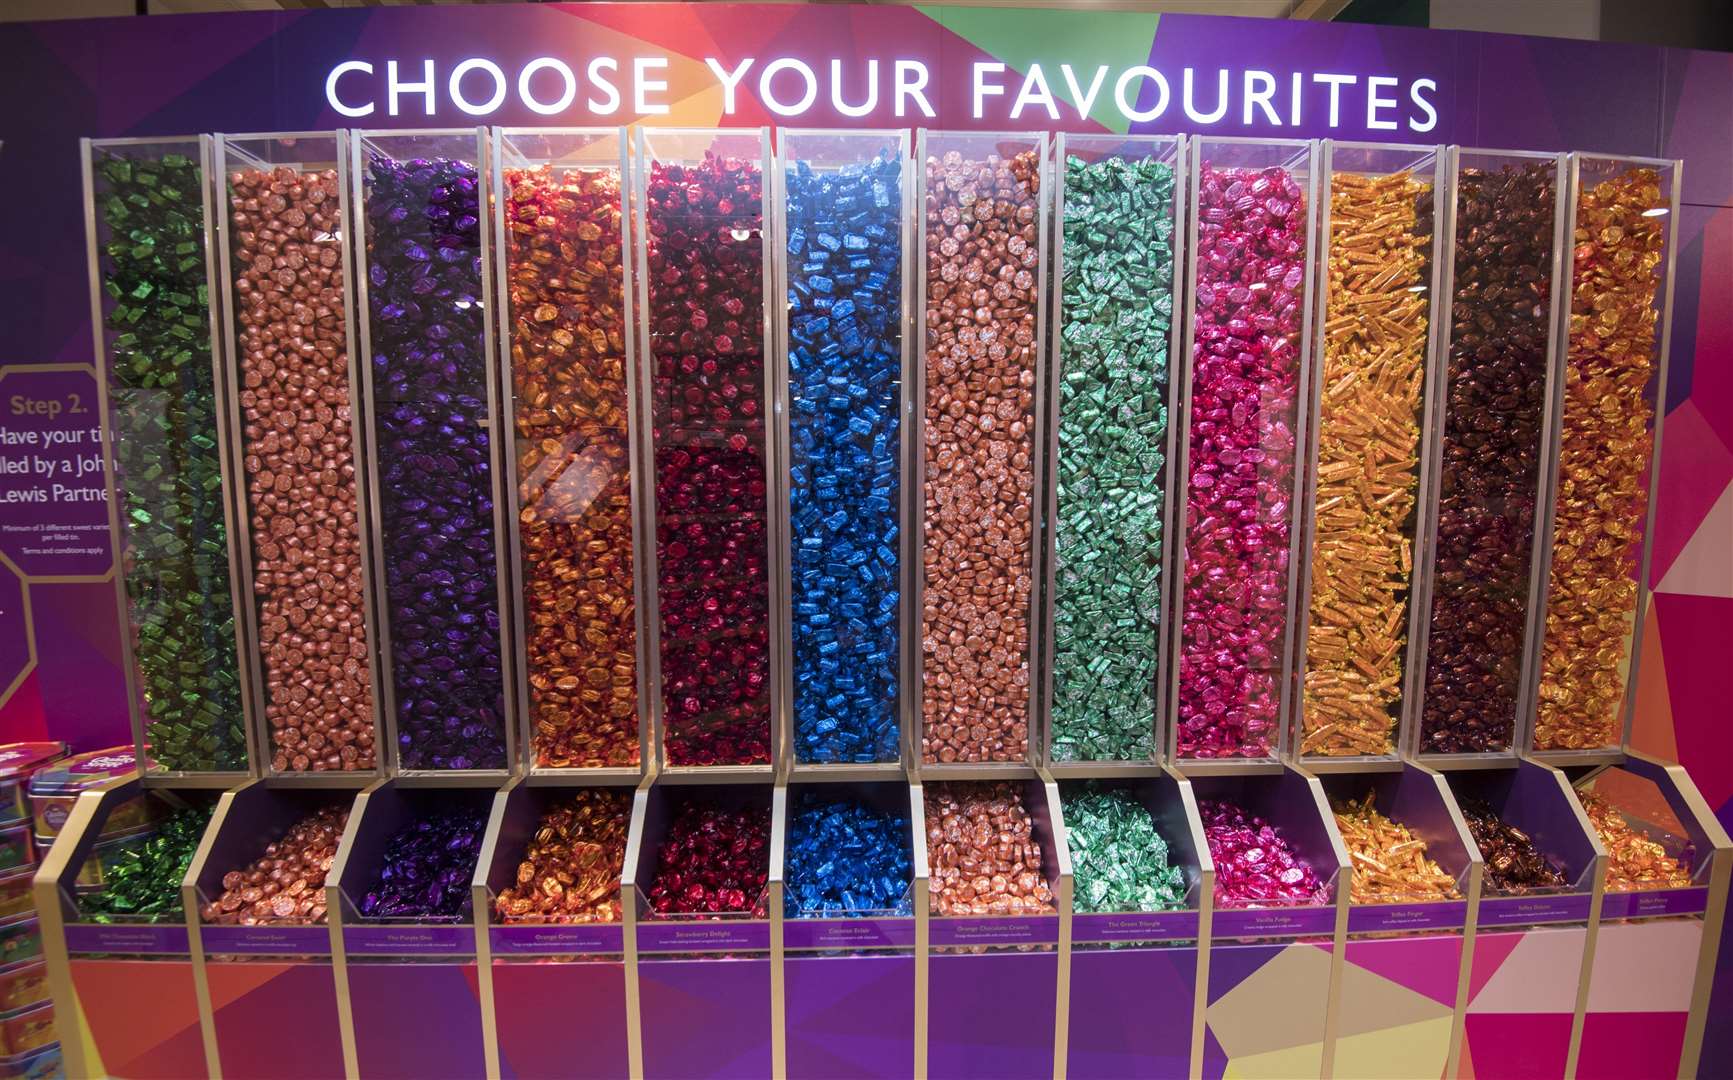 John Lewis has a Quality Street pop up this year